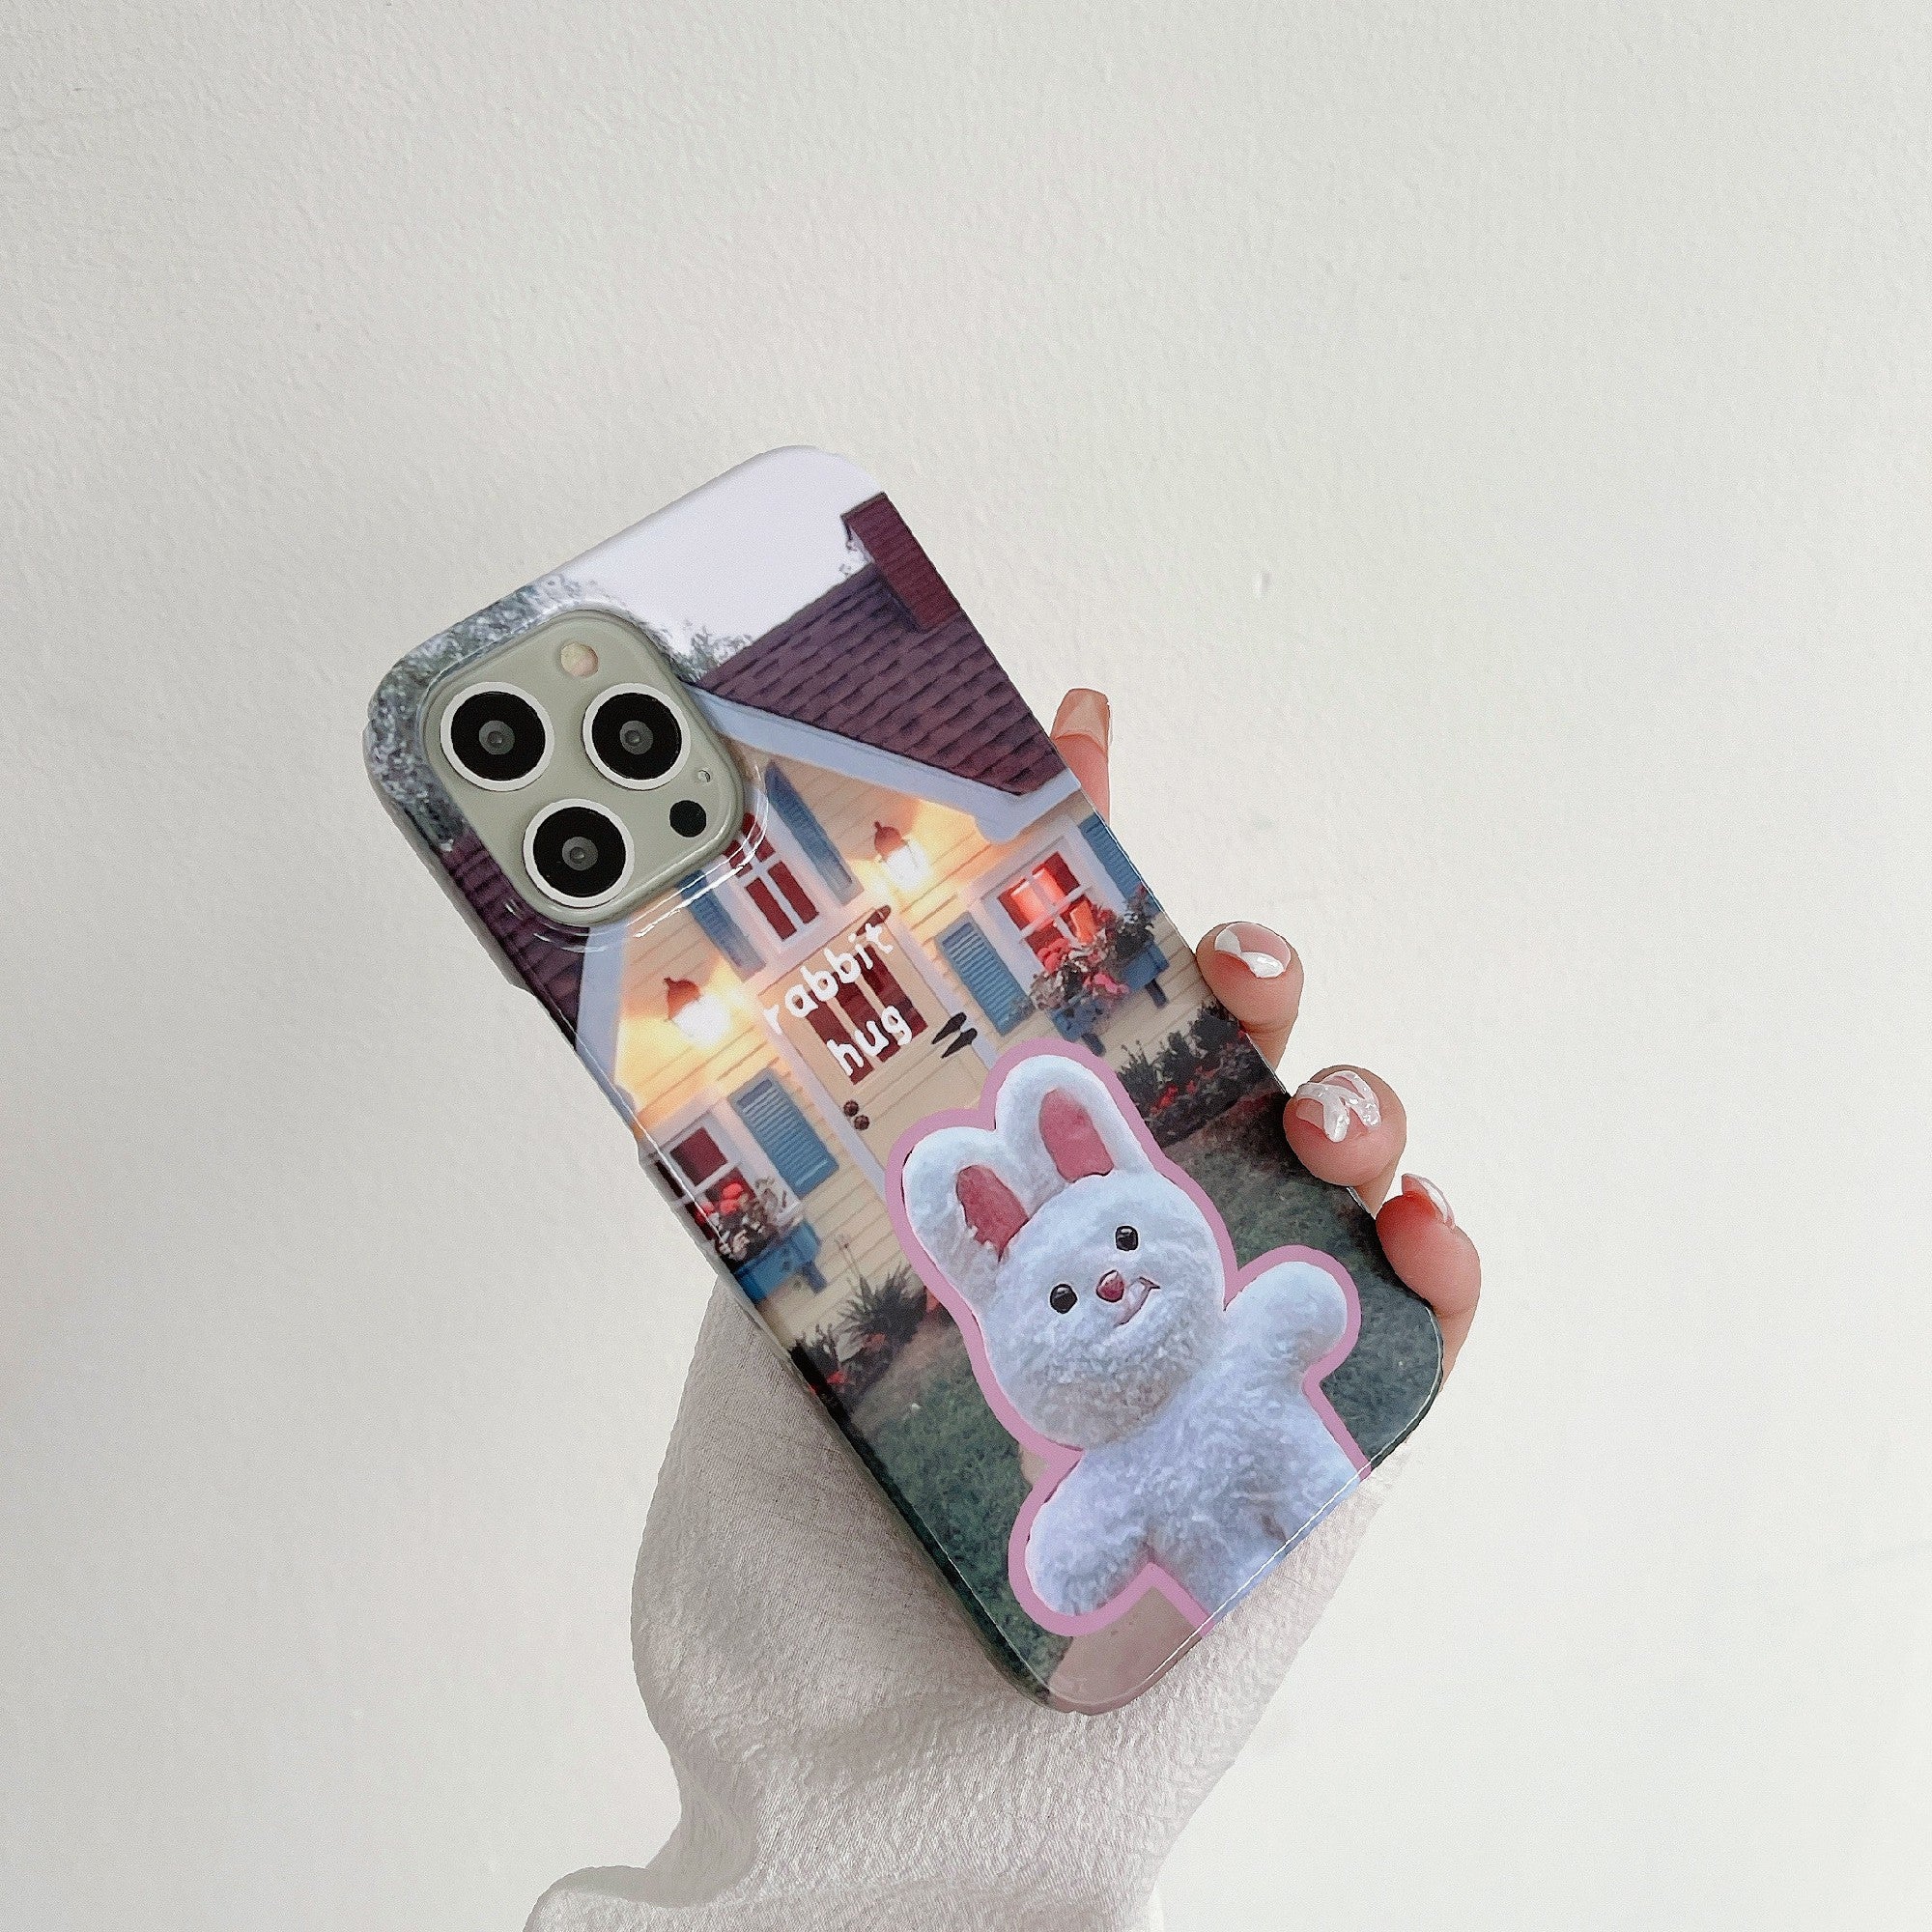 Uniqkart for iPhone 12 Pro Max 6.7 inch Hard PC Phone Case Pattern Printing Protective Glossy Phone Shell - Rabbit Hug